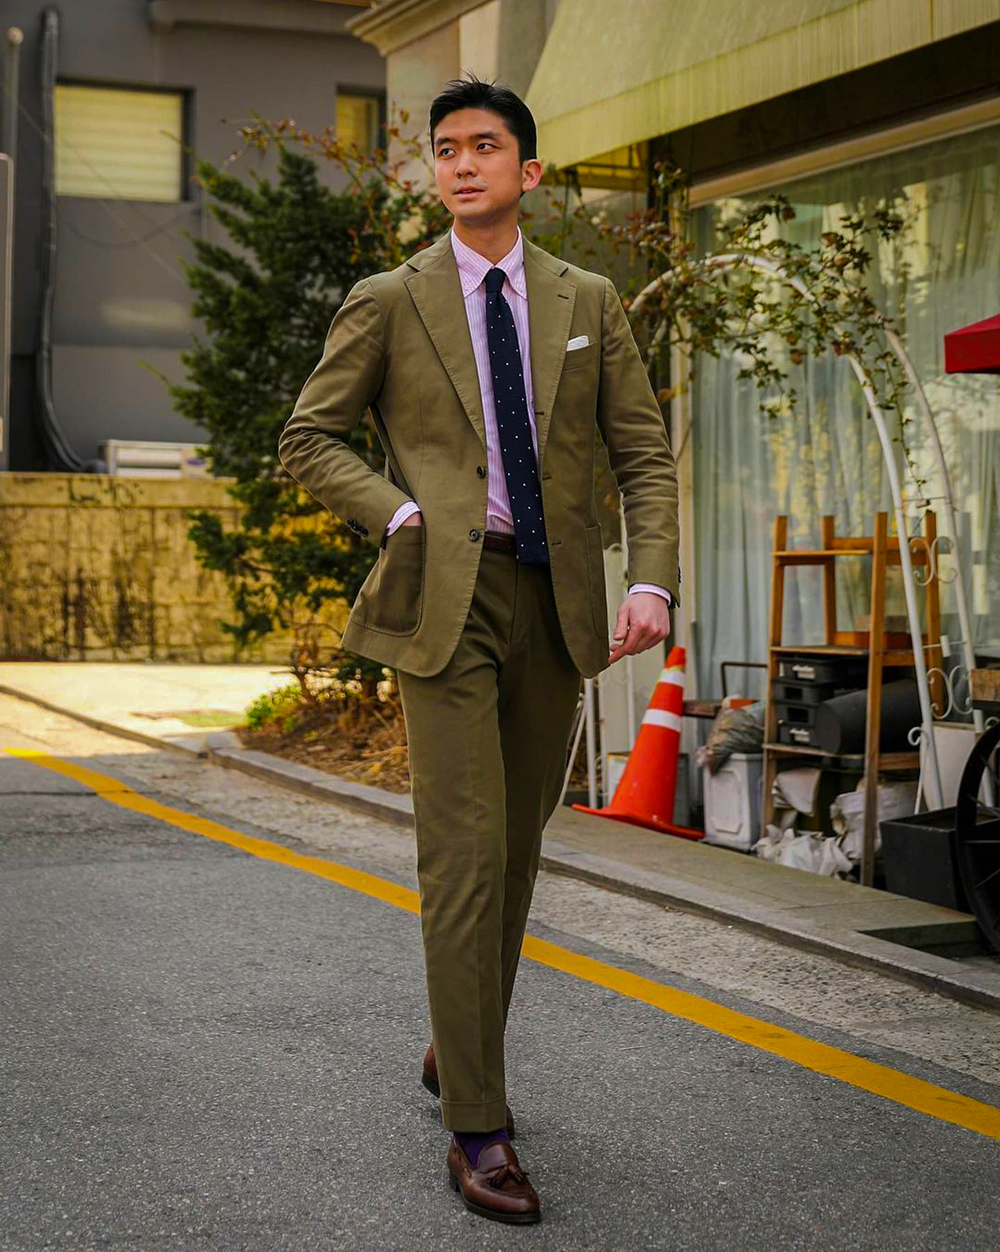 Olive suit, pink dress shirt, tassel loafers outfit